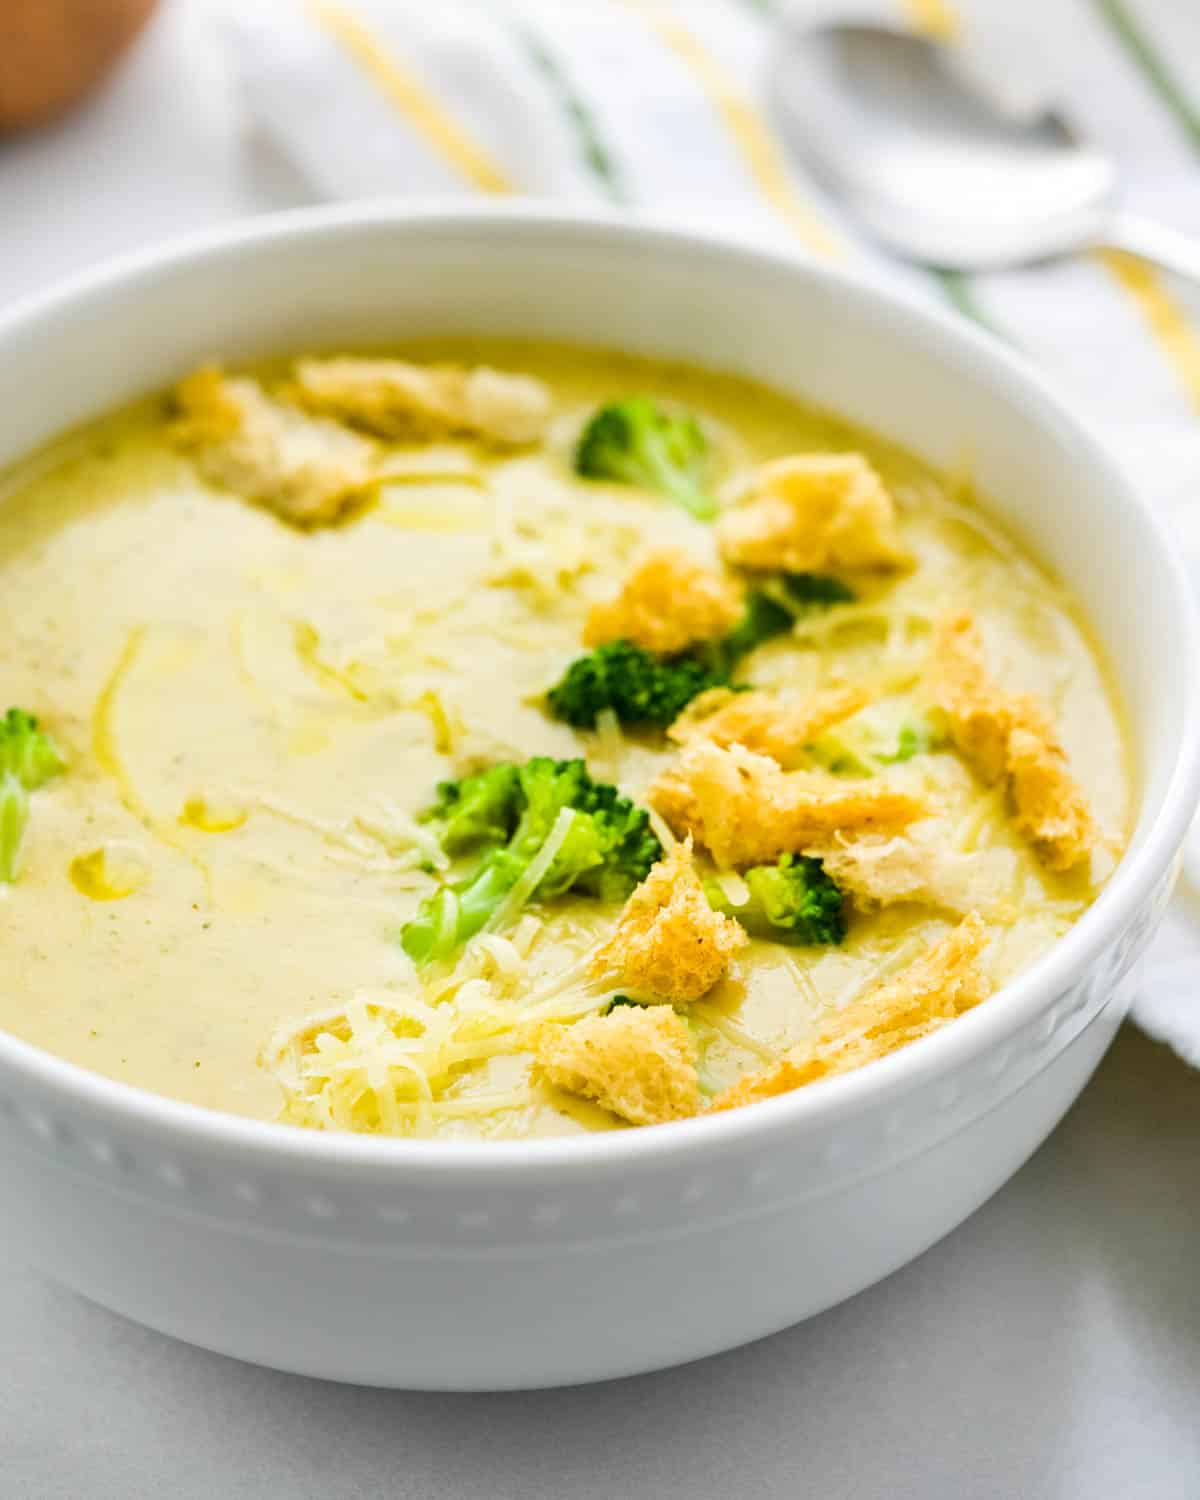 A bowl of broccoli cheese soup with truffled croutons.